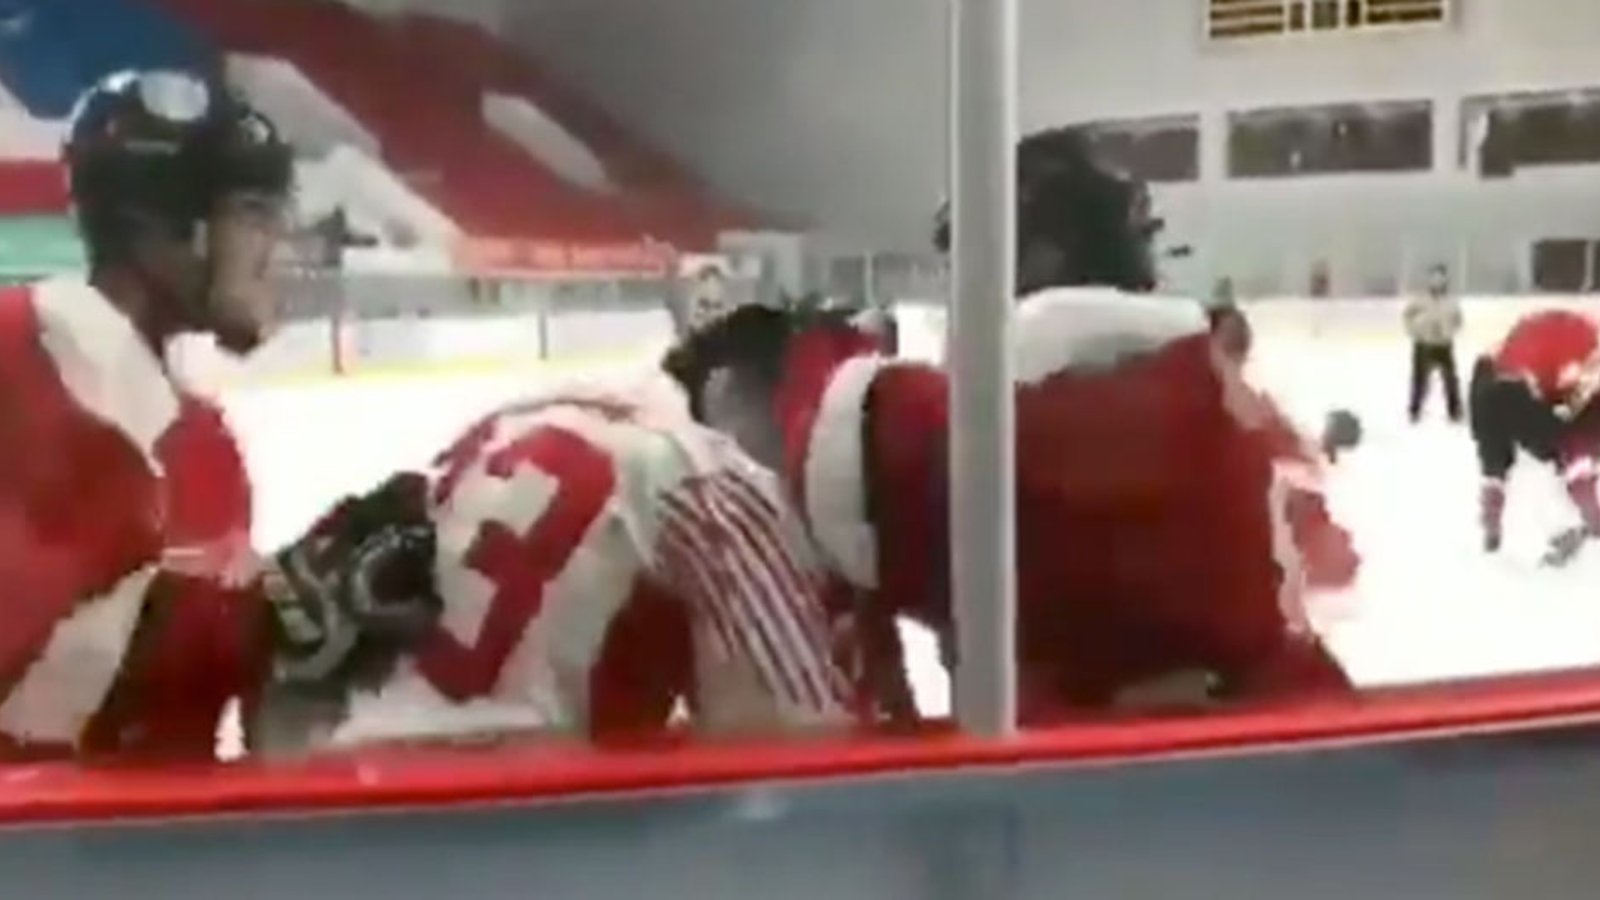 Disgraceful brawl breaks out in Hong Kong at youth tournament